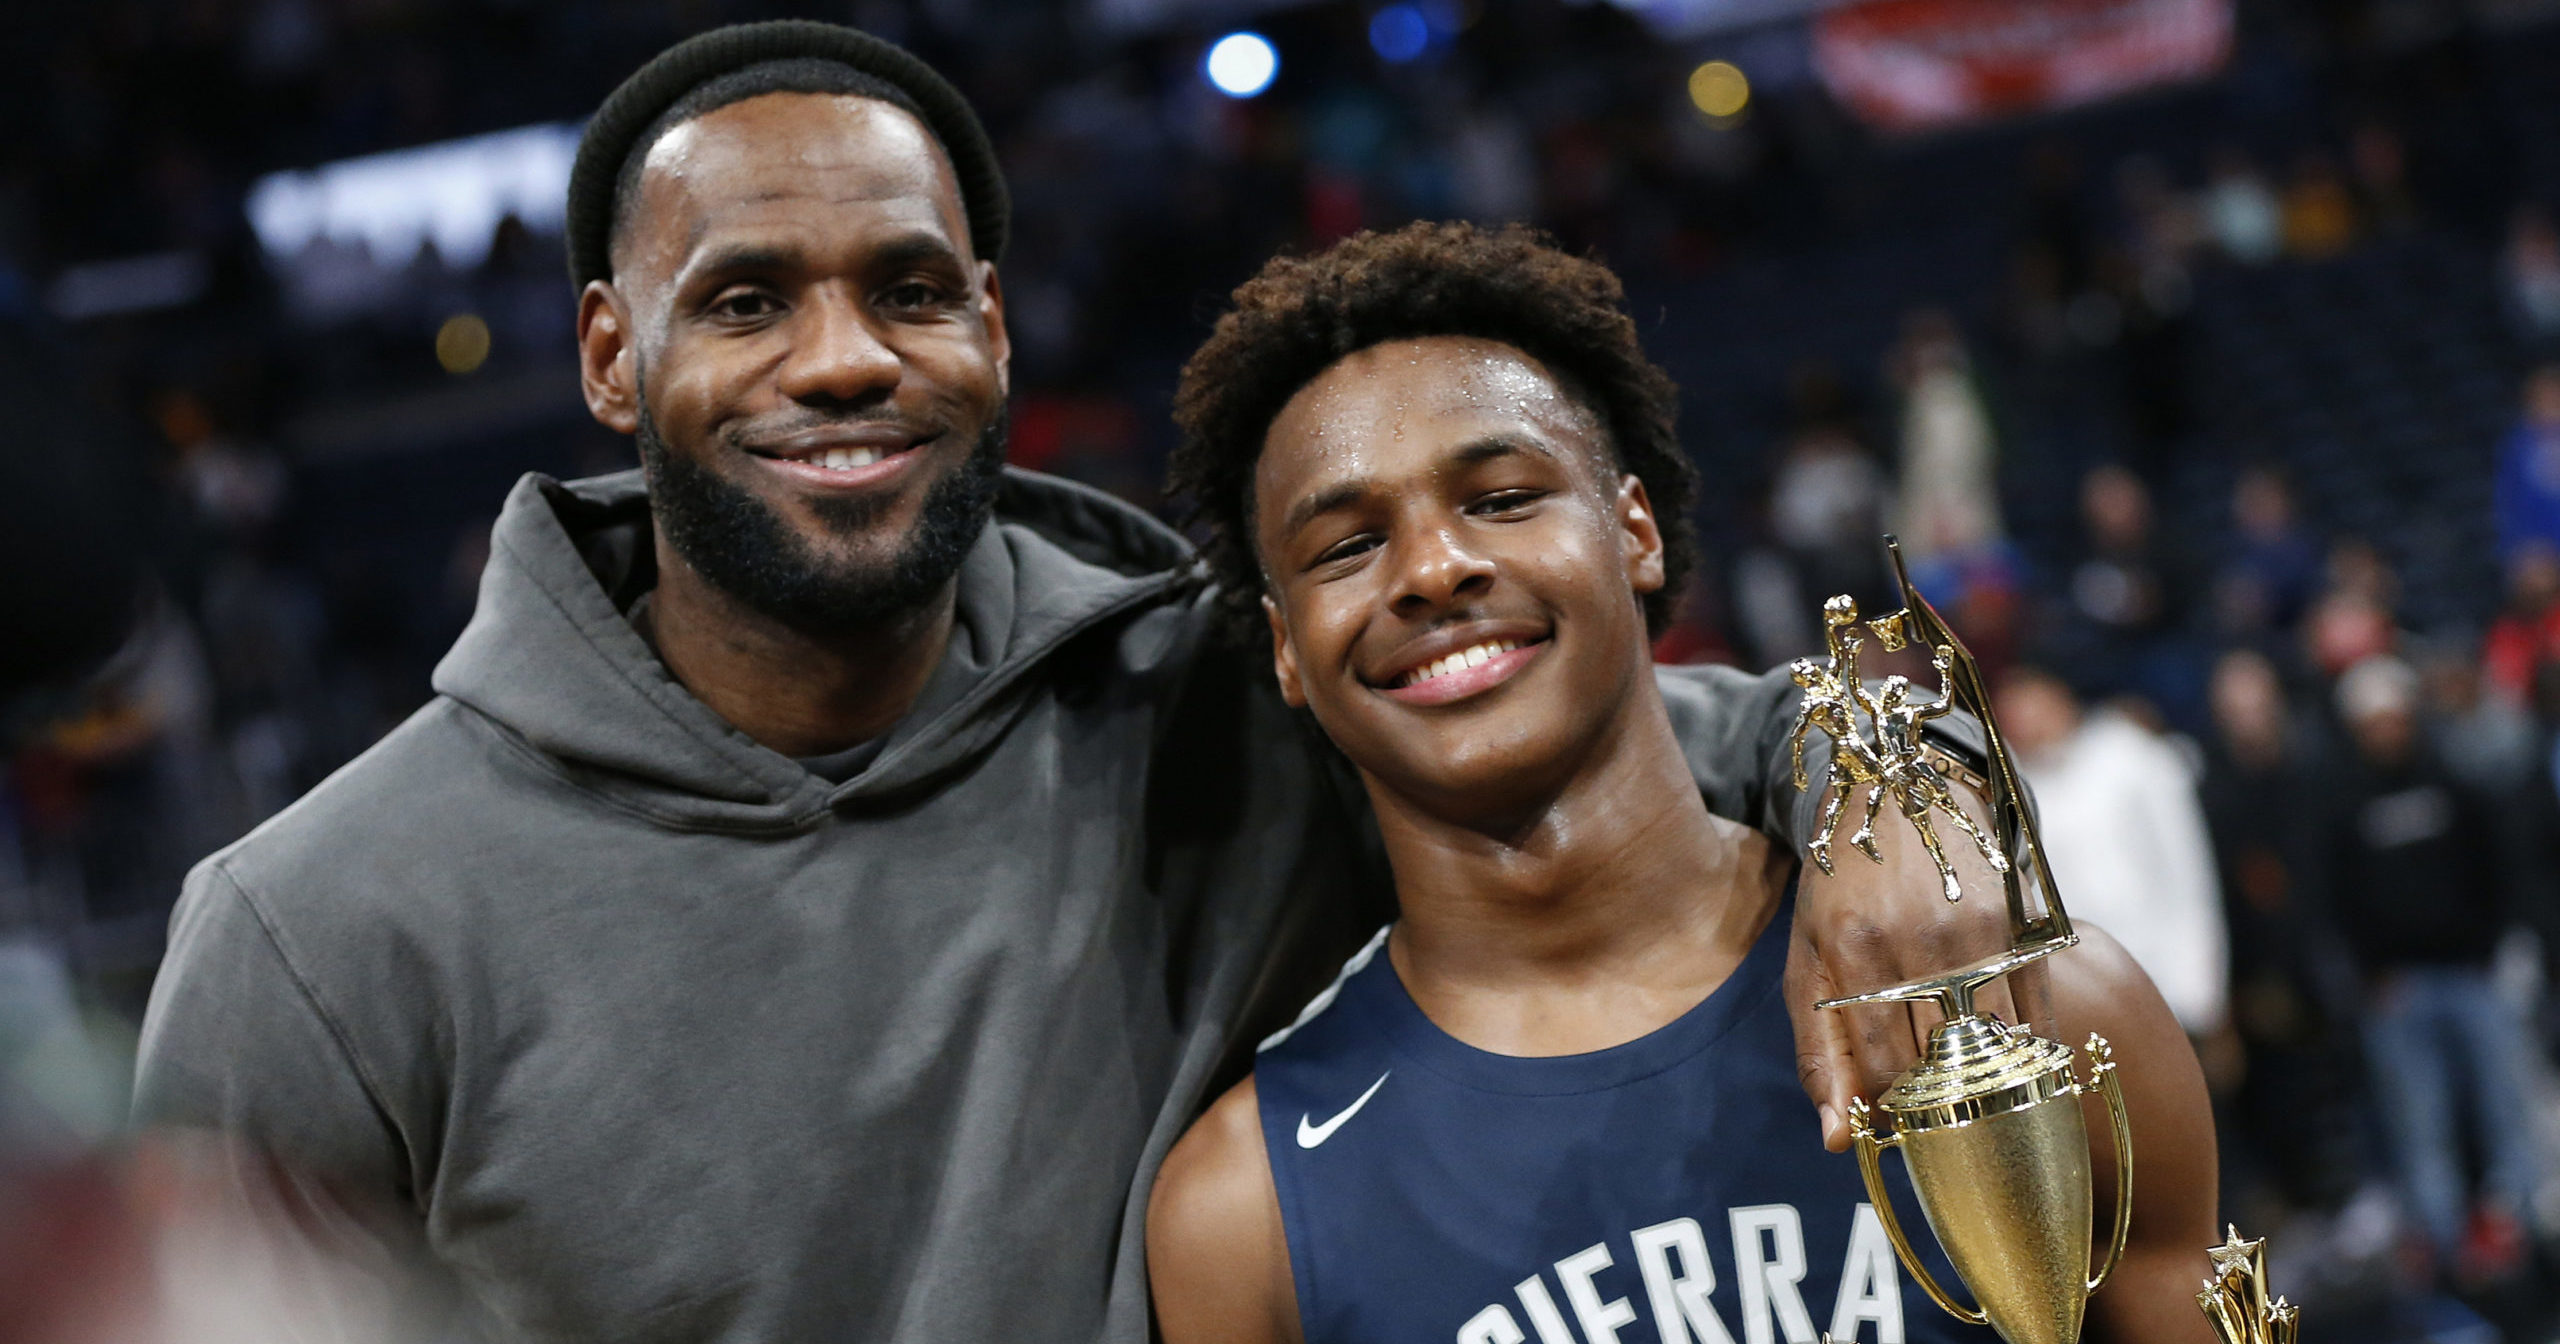 LeBron James, left, poses with his son Bronny after Sierra Canyon beat Akron St. Vincent-St. Mary in a high school basketball game on Dec. 14, 2019, in Columbus, Ohio.